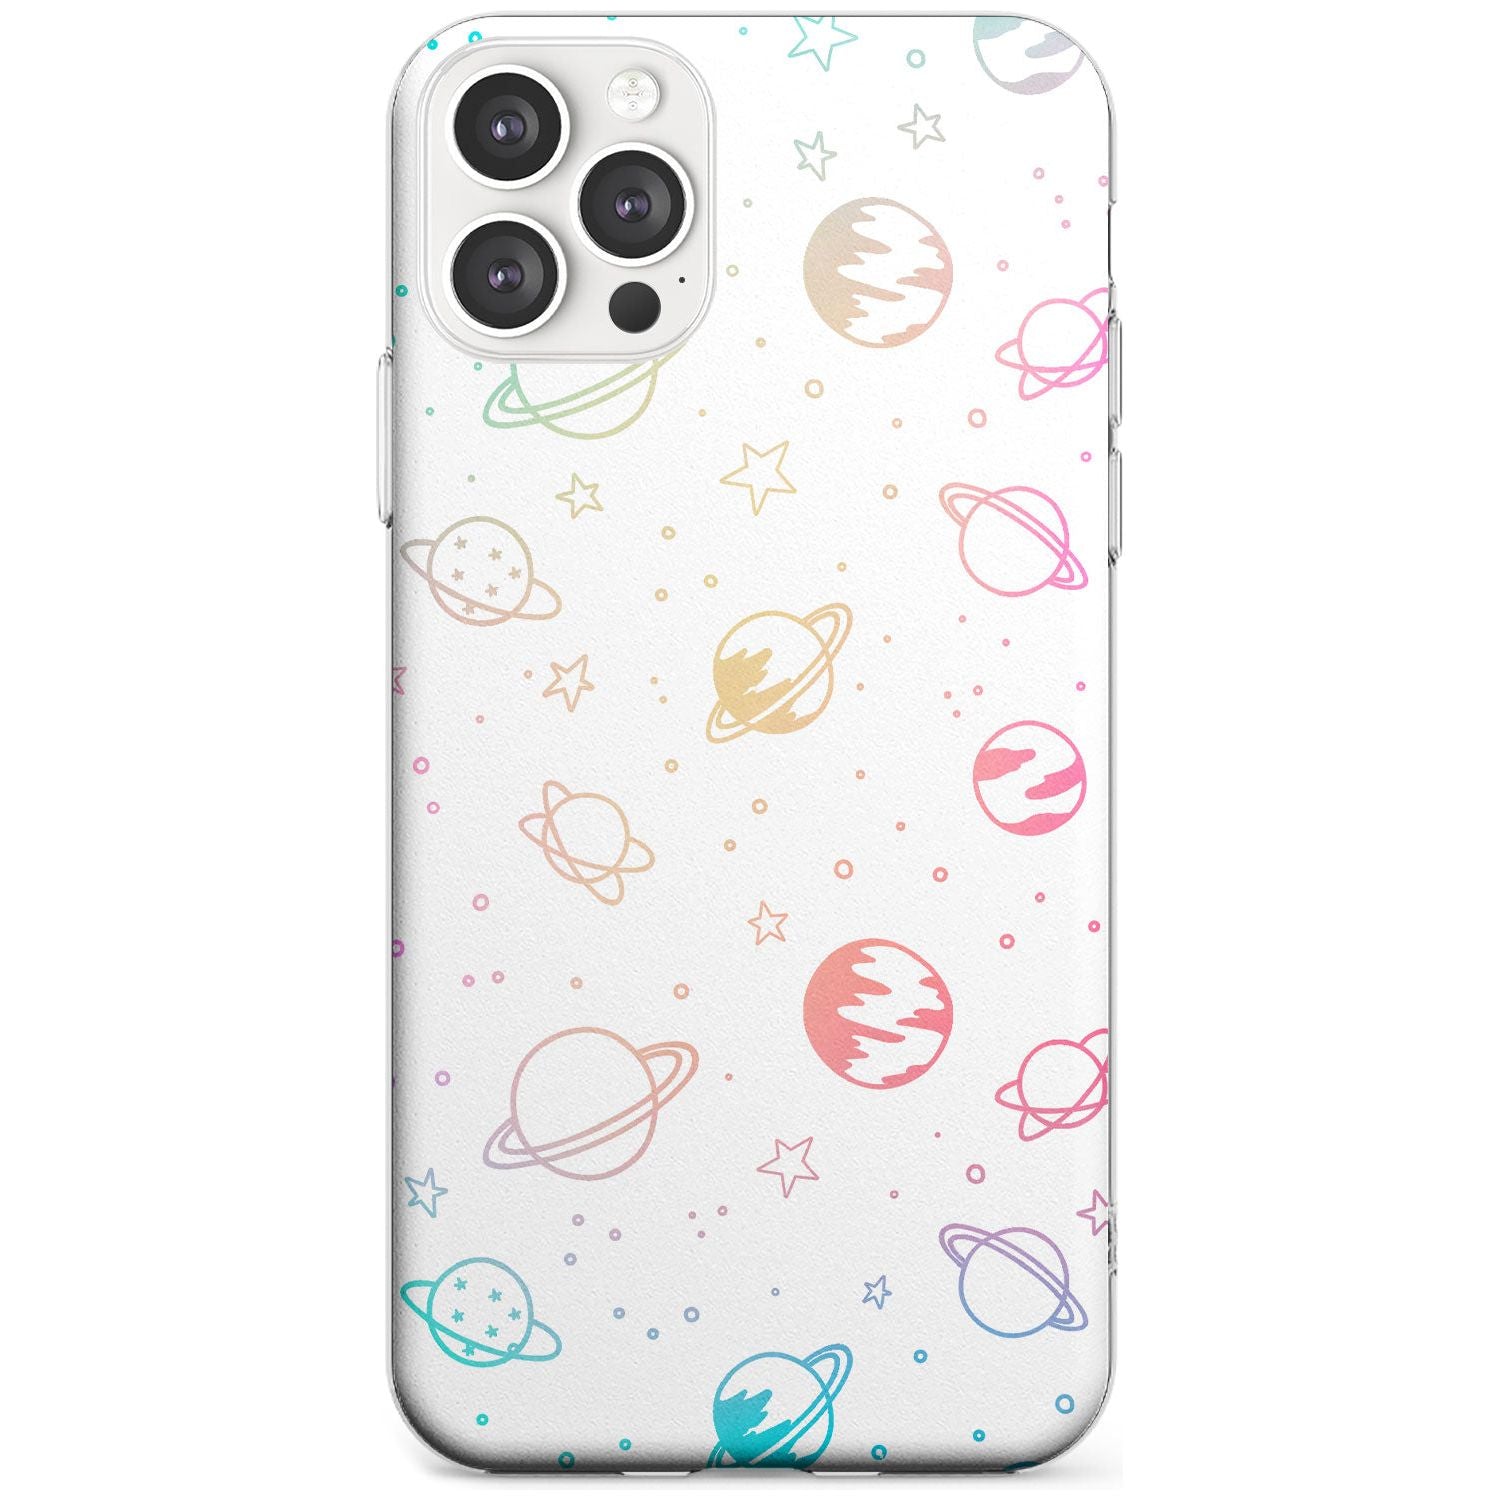 Outer Space Outlines: Pastels on White Black Impact Phone Case for iPhone 11 Pro Max